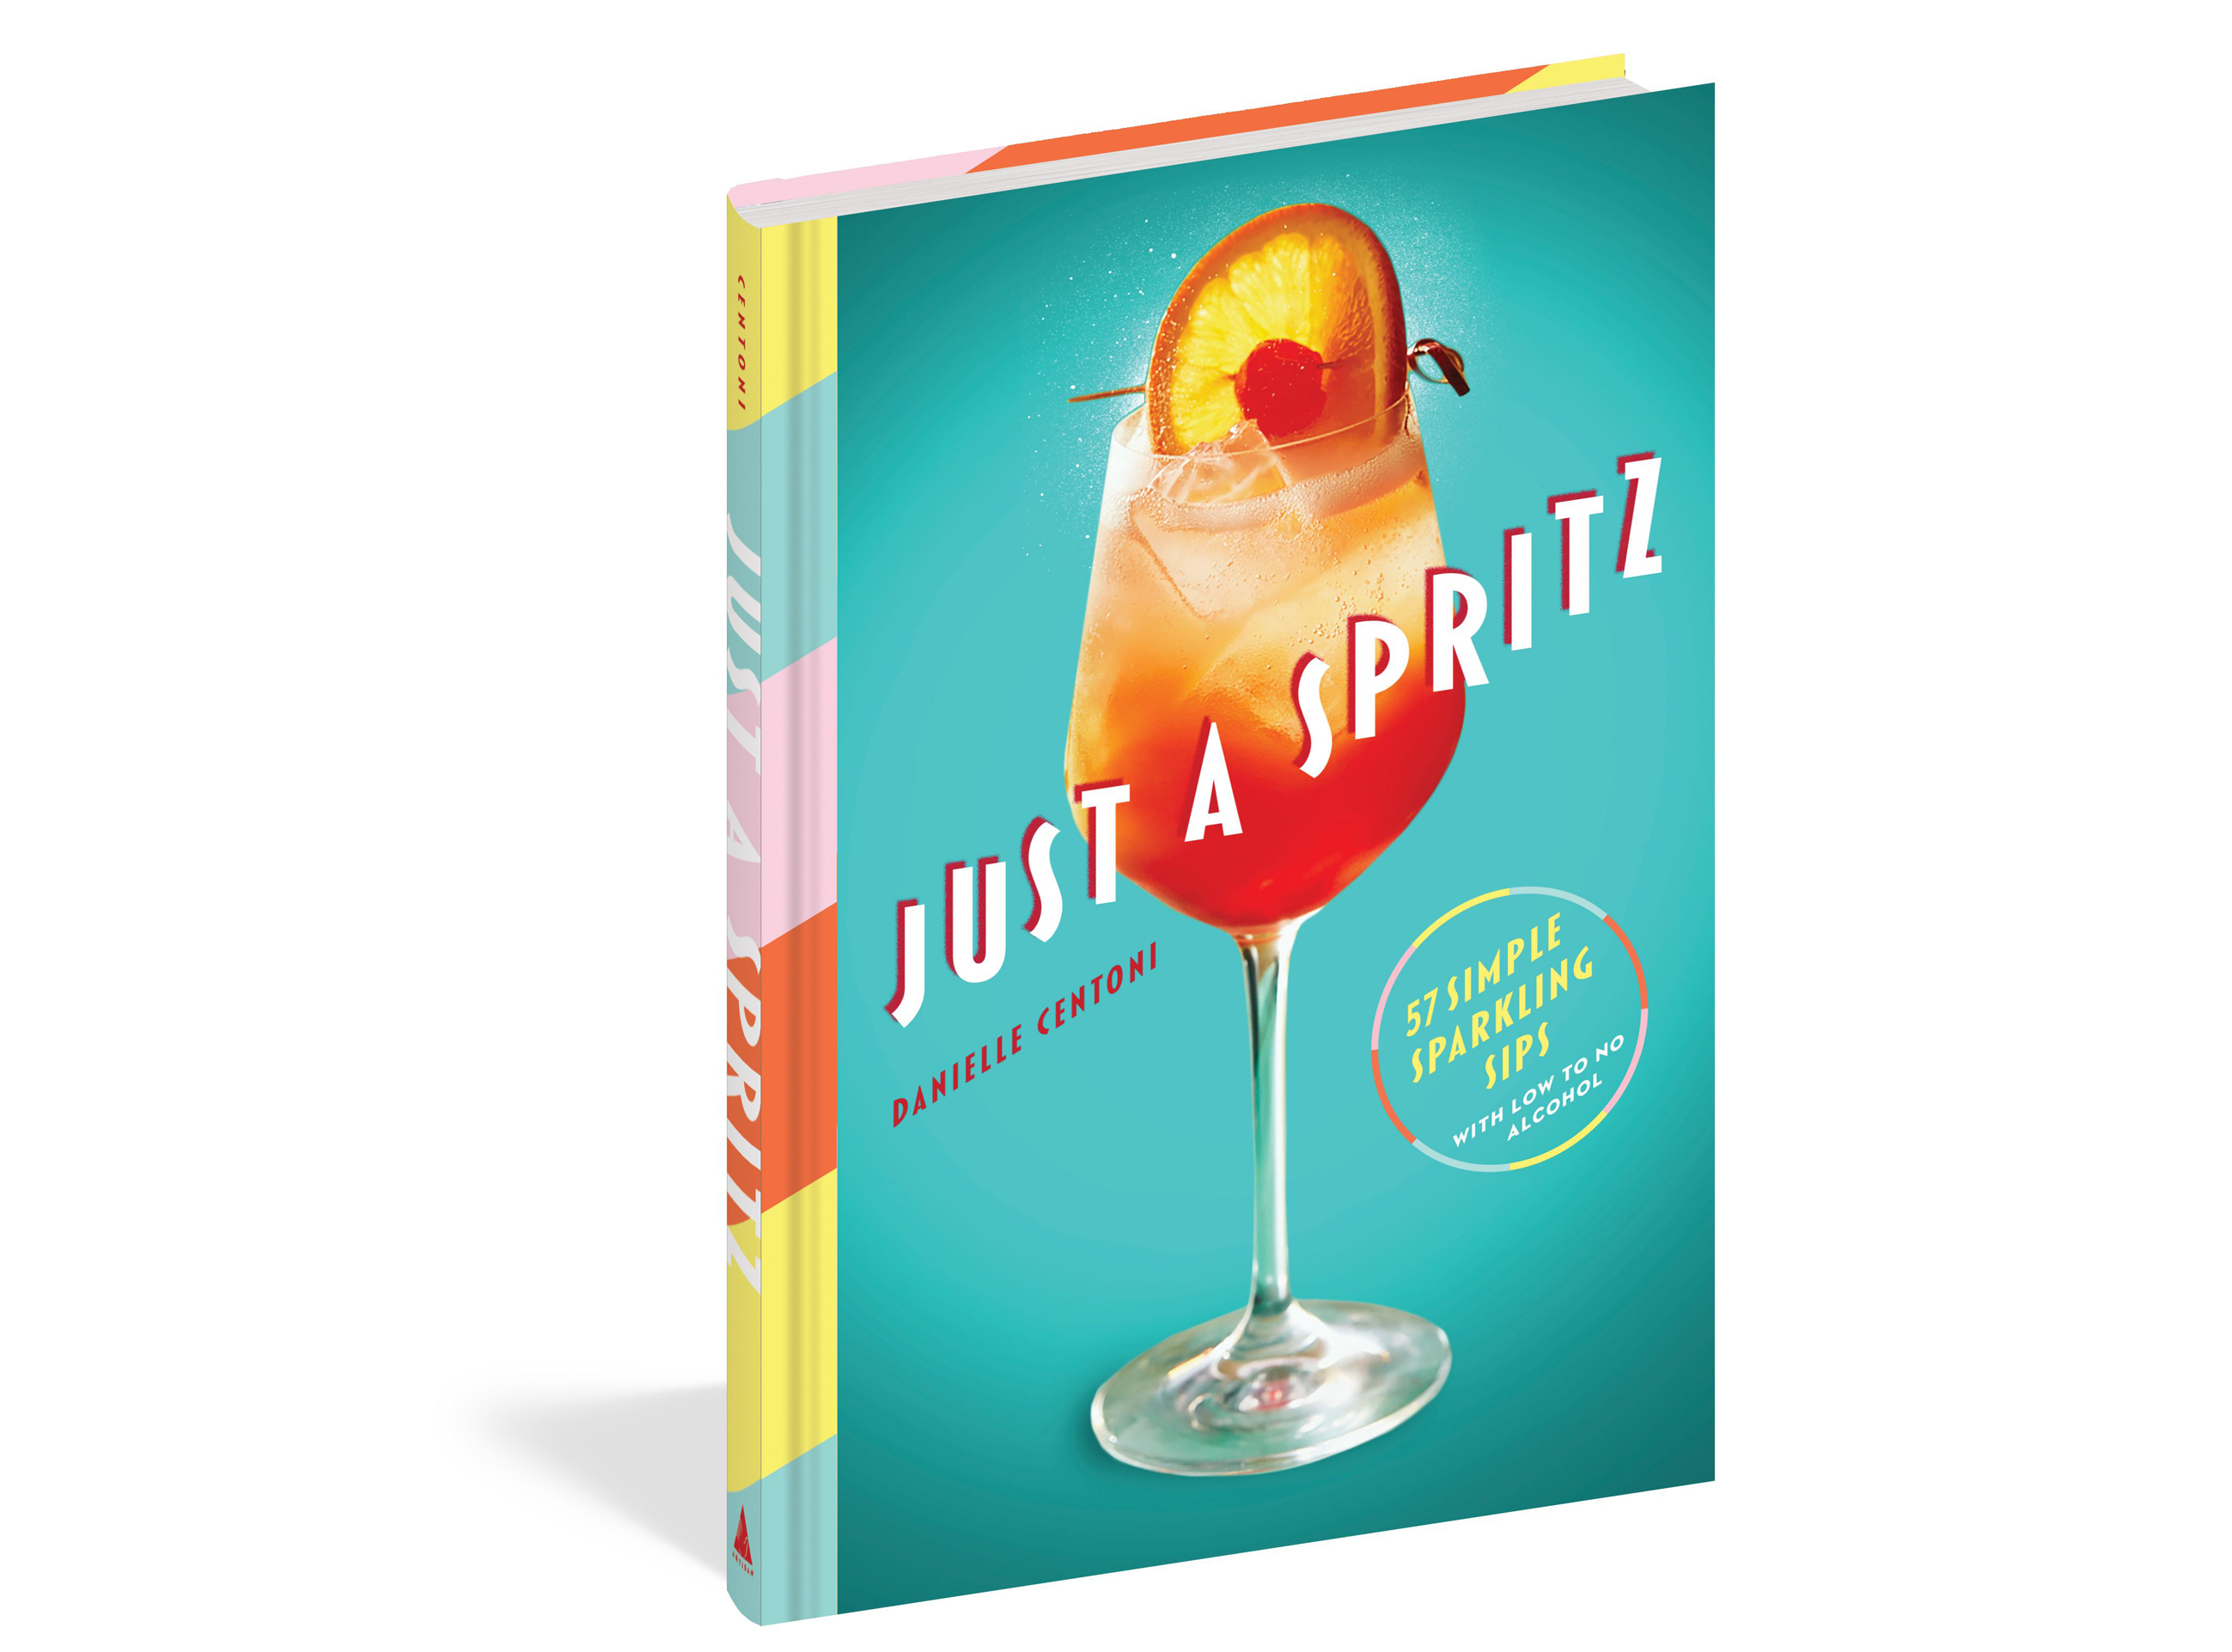 Just a Spritz: 57 Simple Sparkling Sips with Low to No Alcohol, by Danielle Centoni , photography by Eric Medsker, is published by Artisan Books,